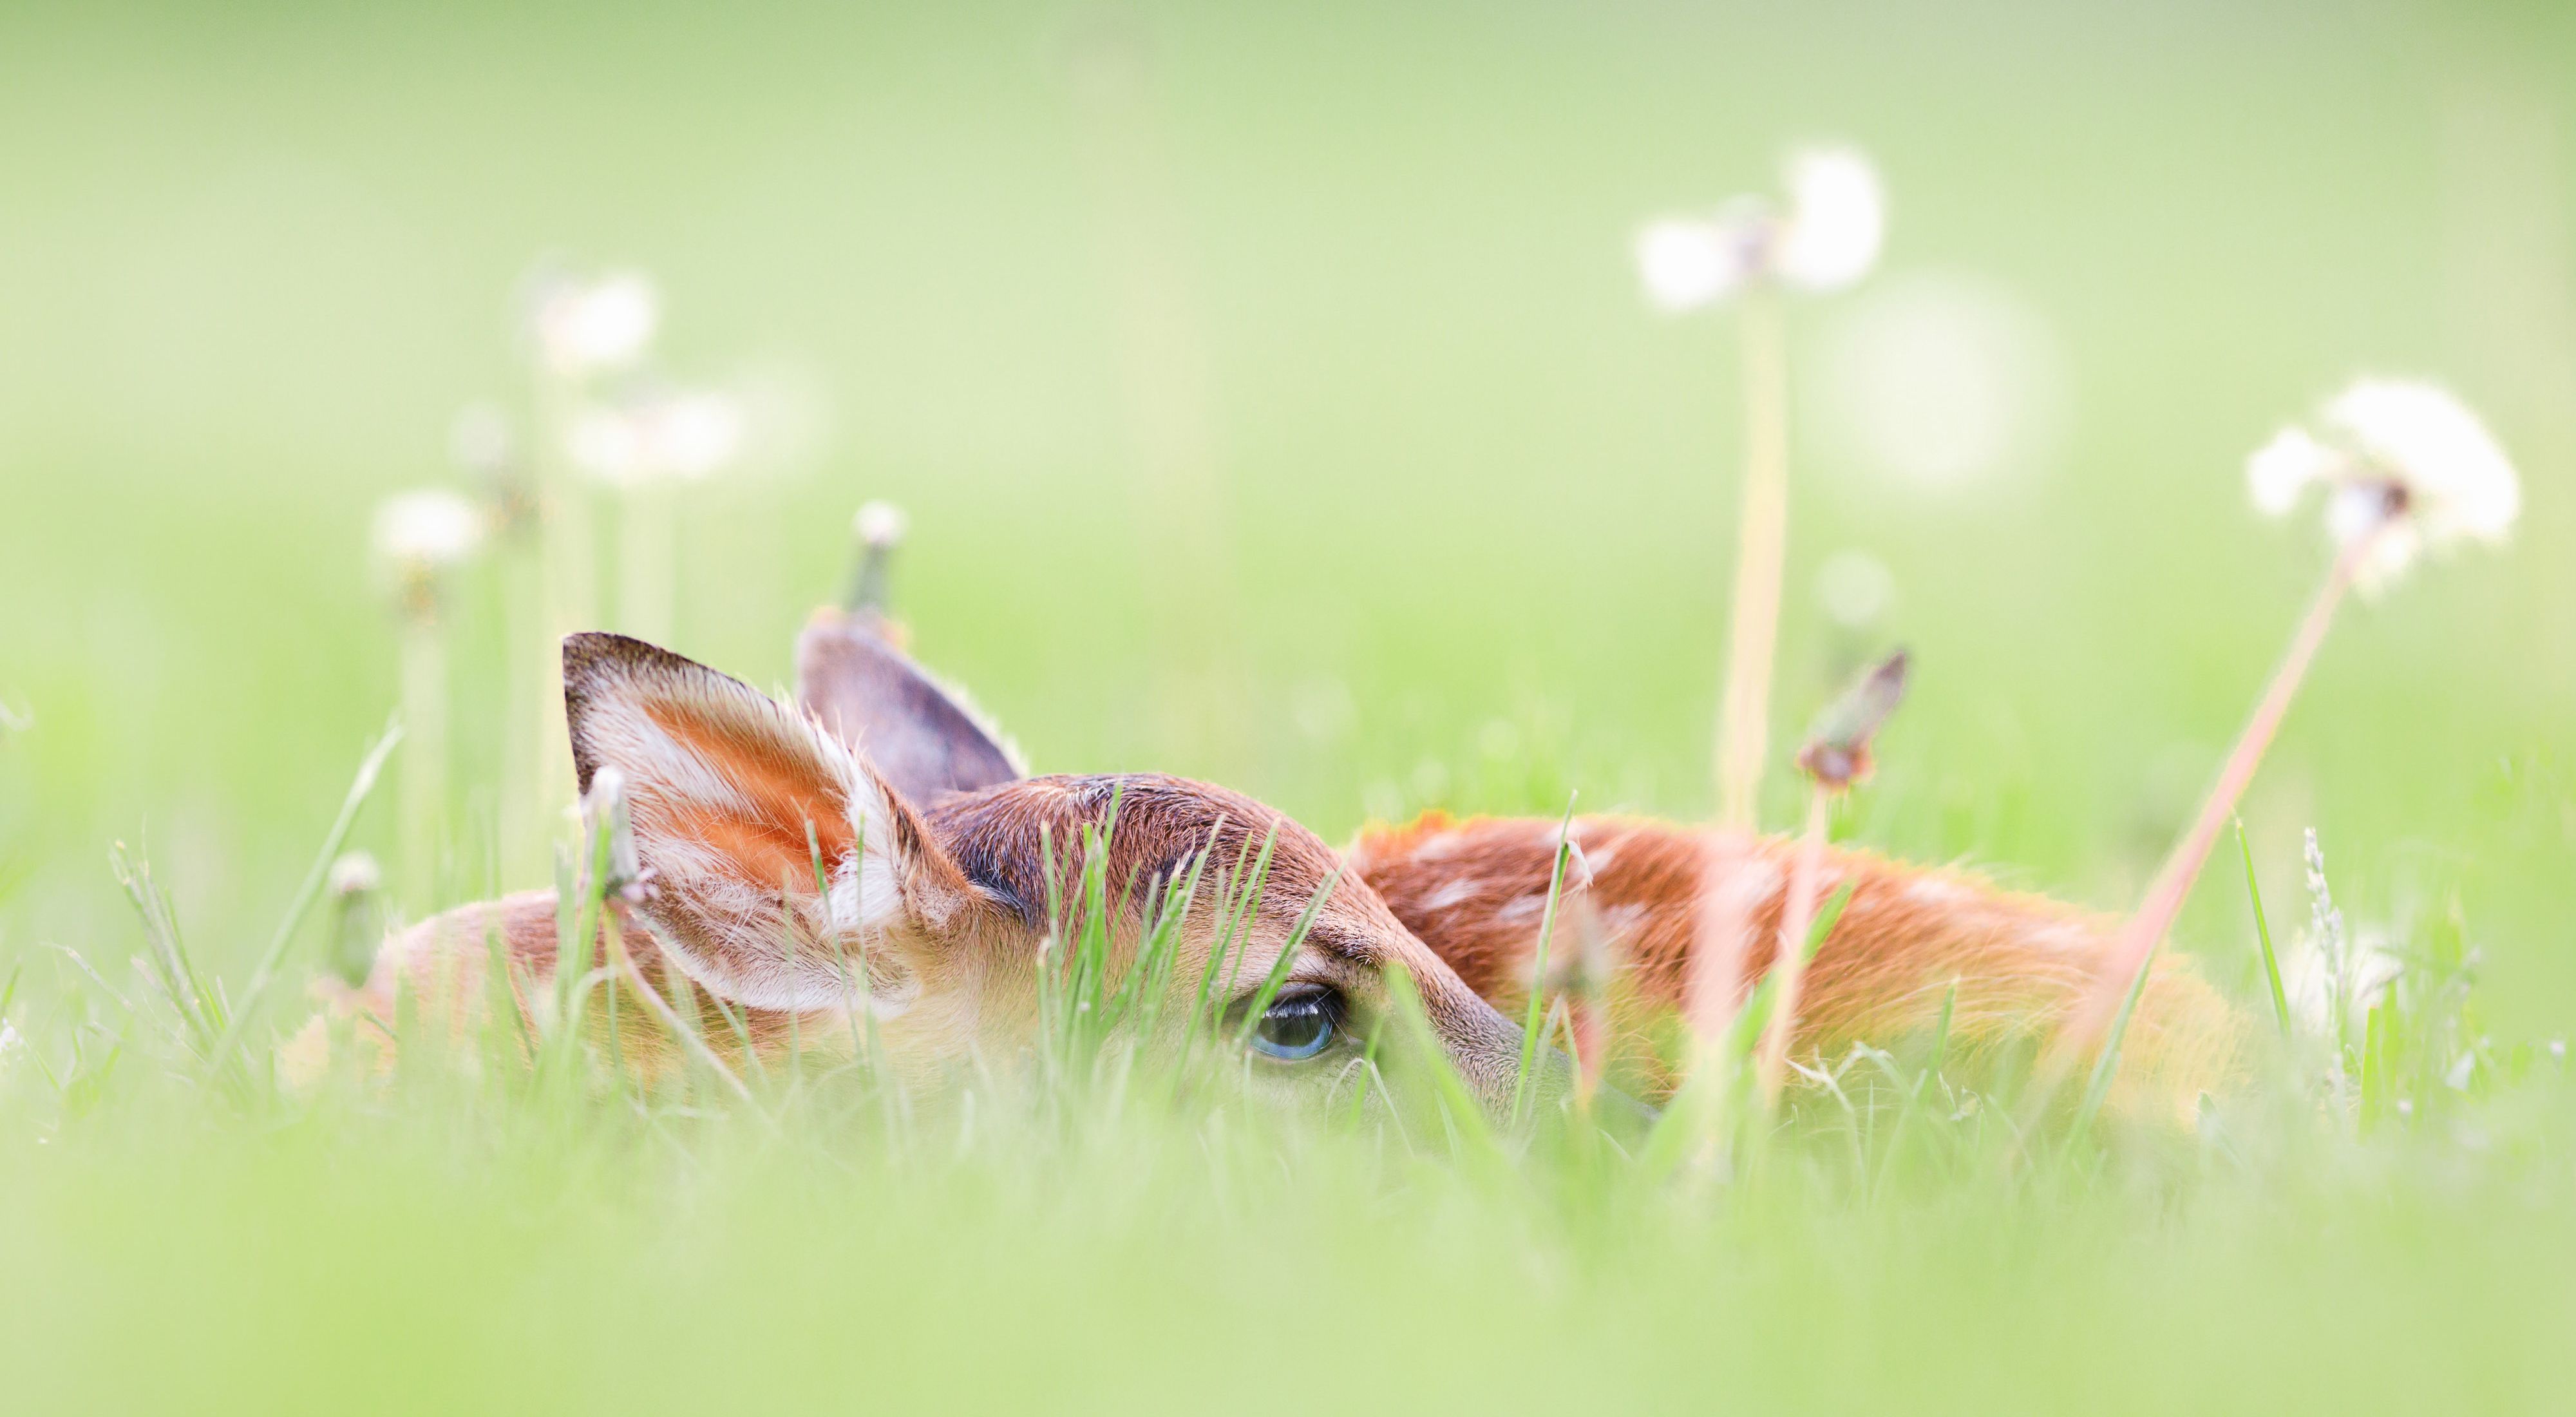 A white-tailed deer fawn lies curled in grass and is surrounded by dandelions.